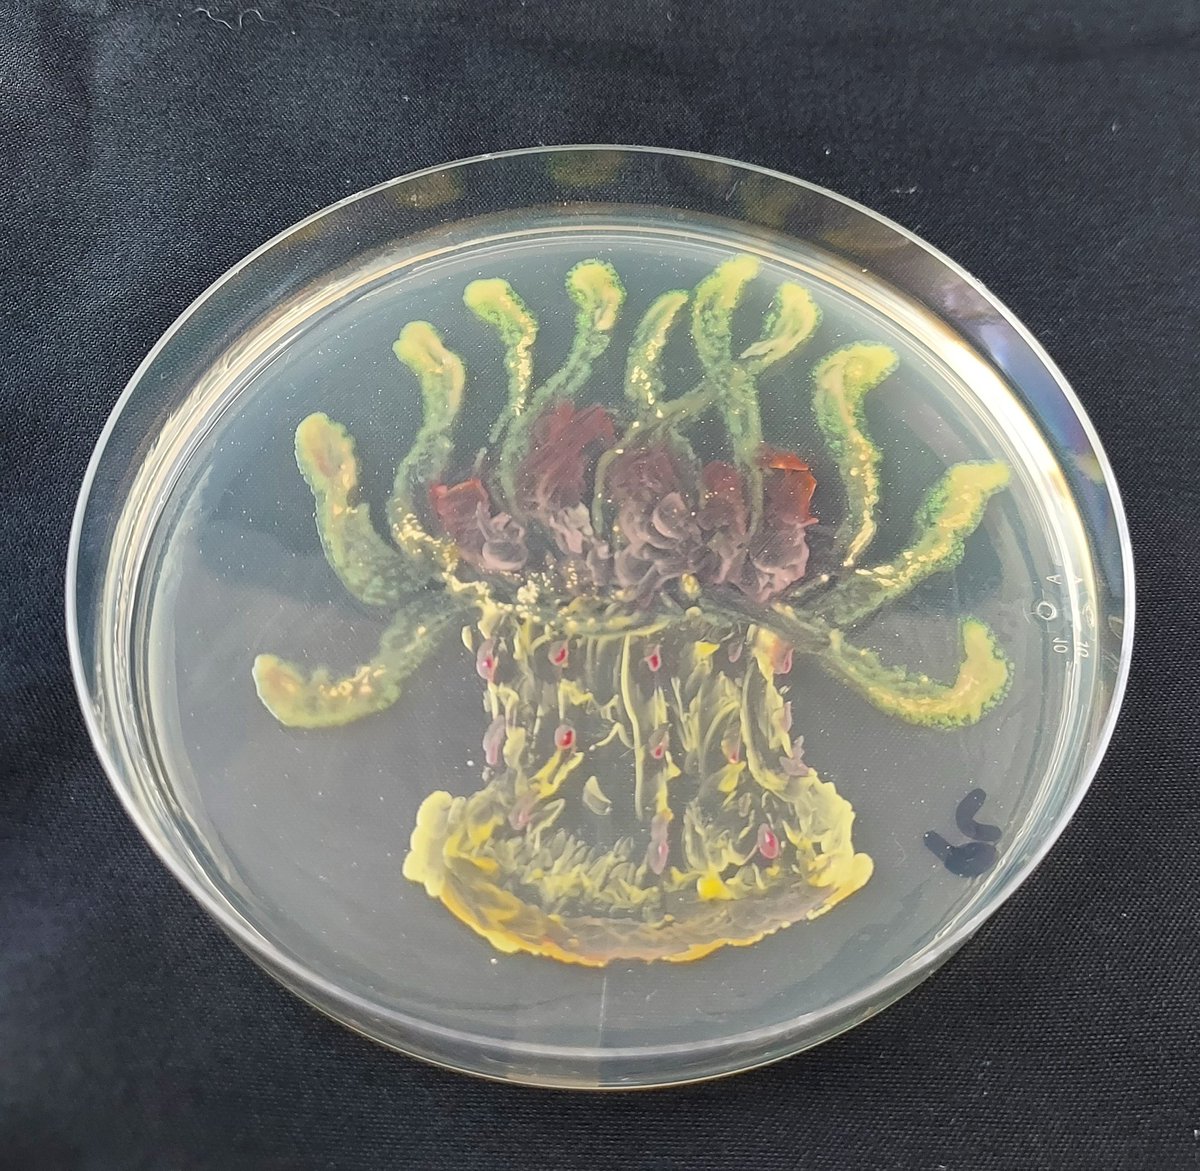 Agar art with my microbial ecology students was a success! I haven't asked yet if I can post any of their pieces, but here's mine 😀!